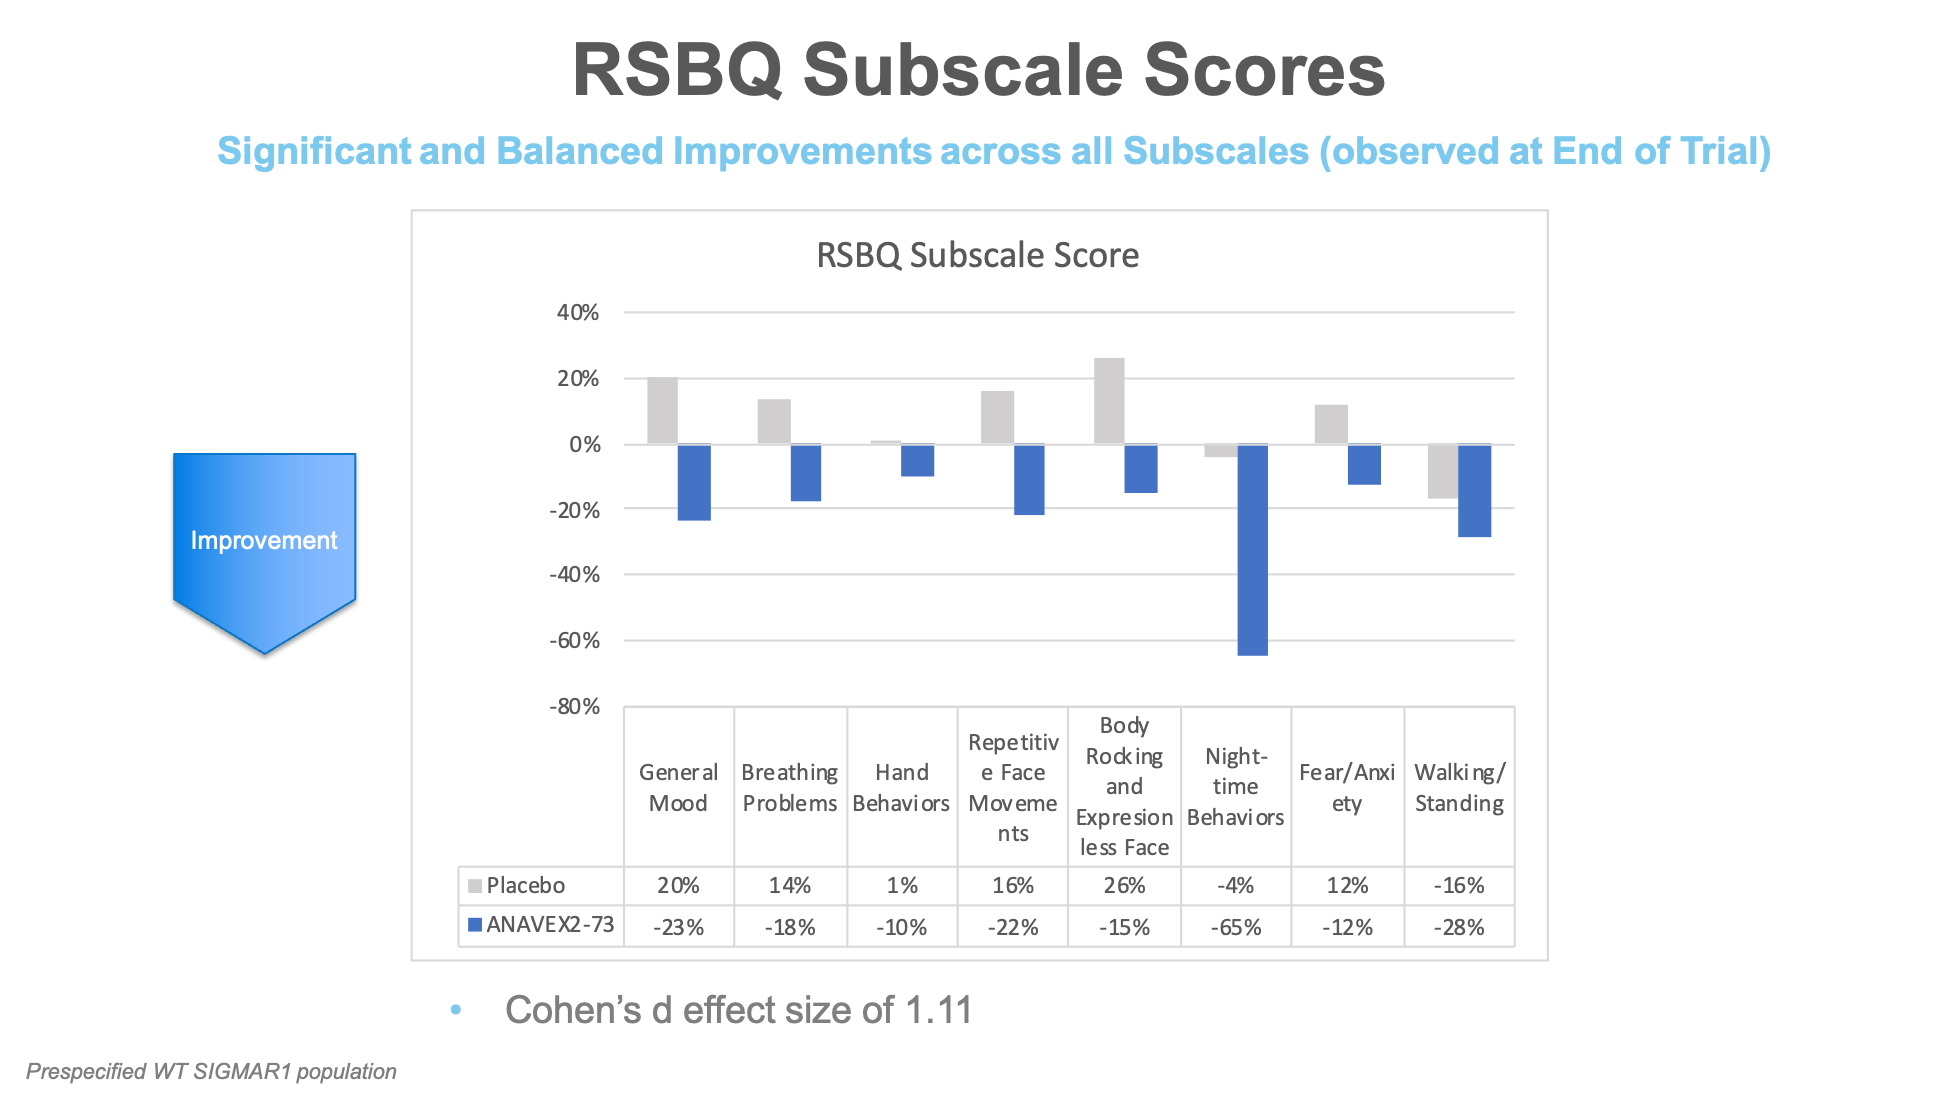 RSBQ Subscale Scores